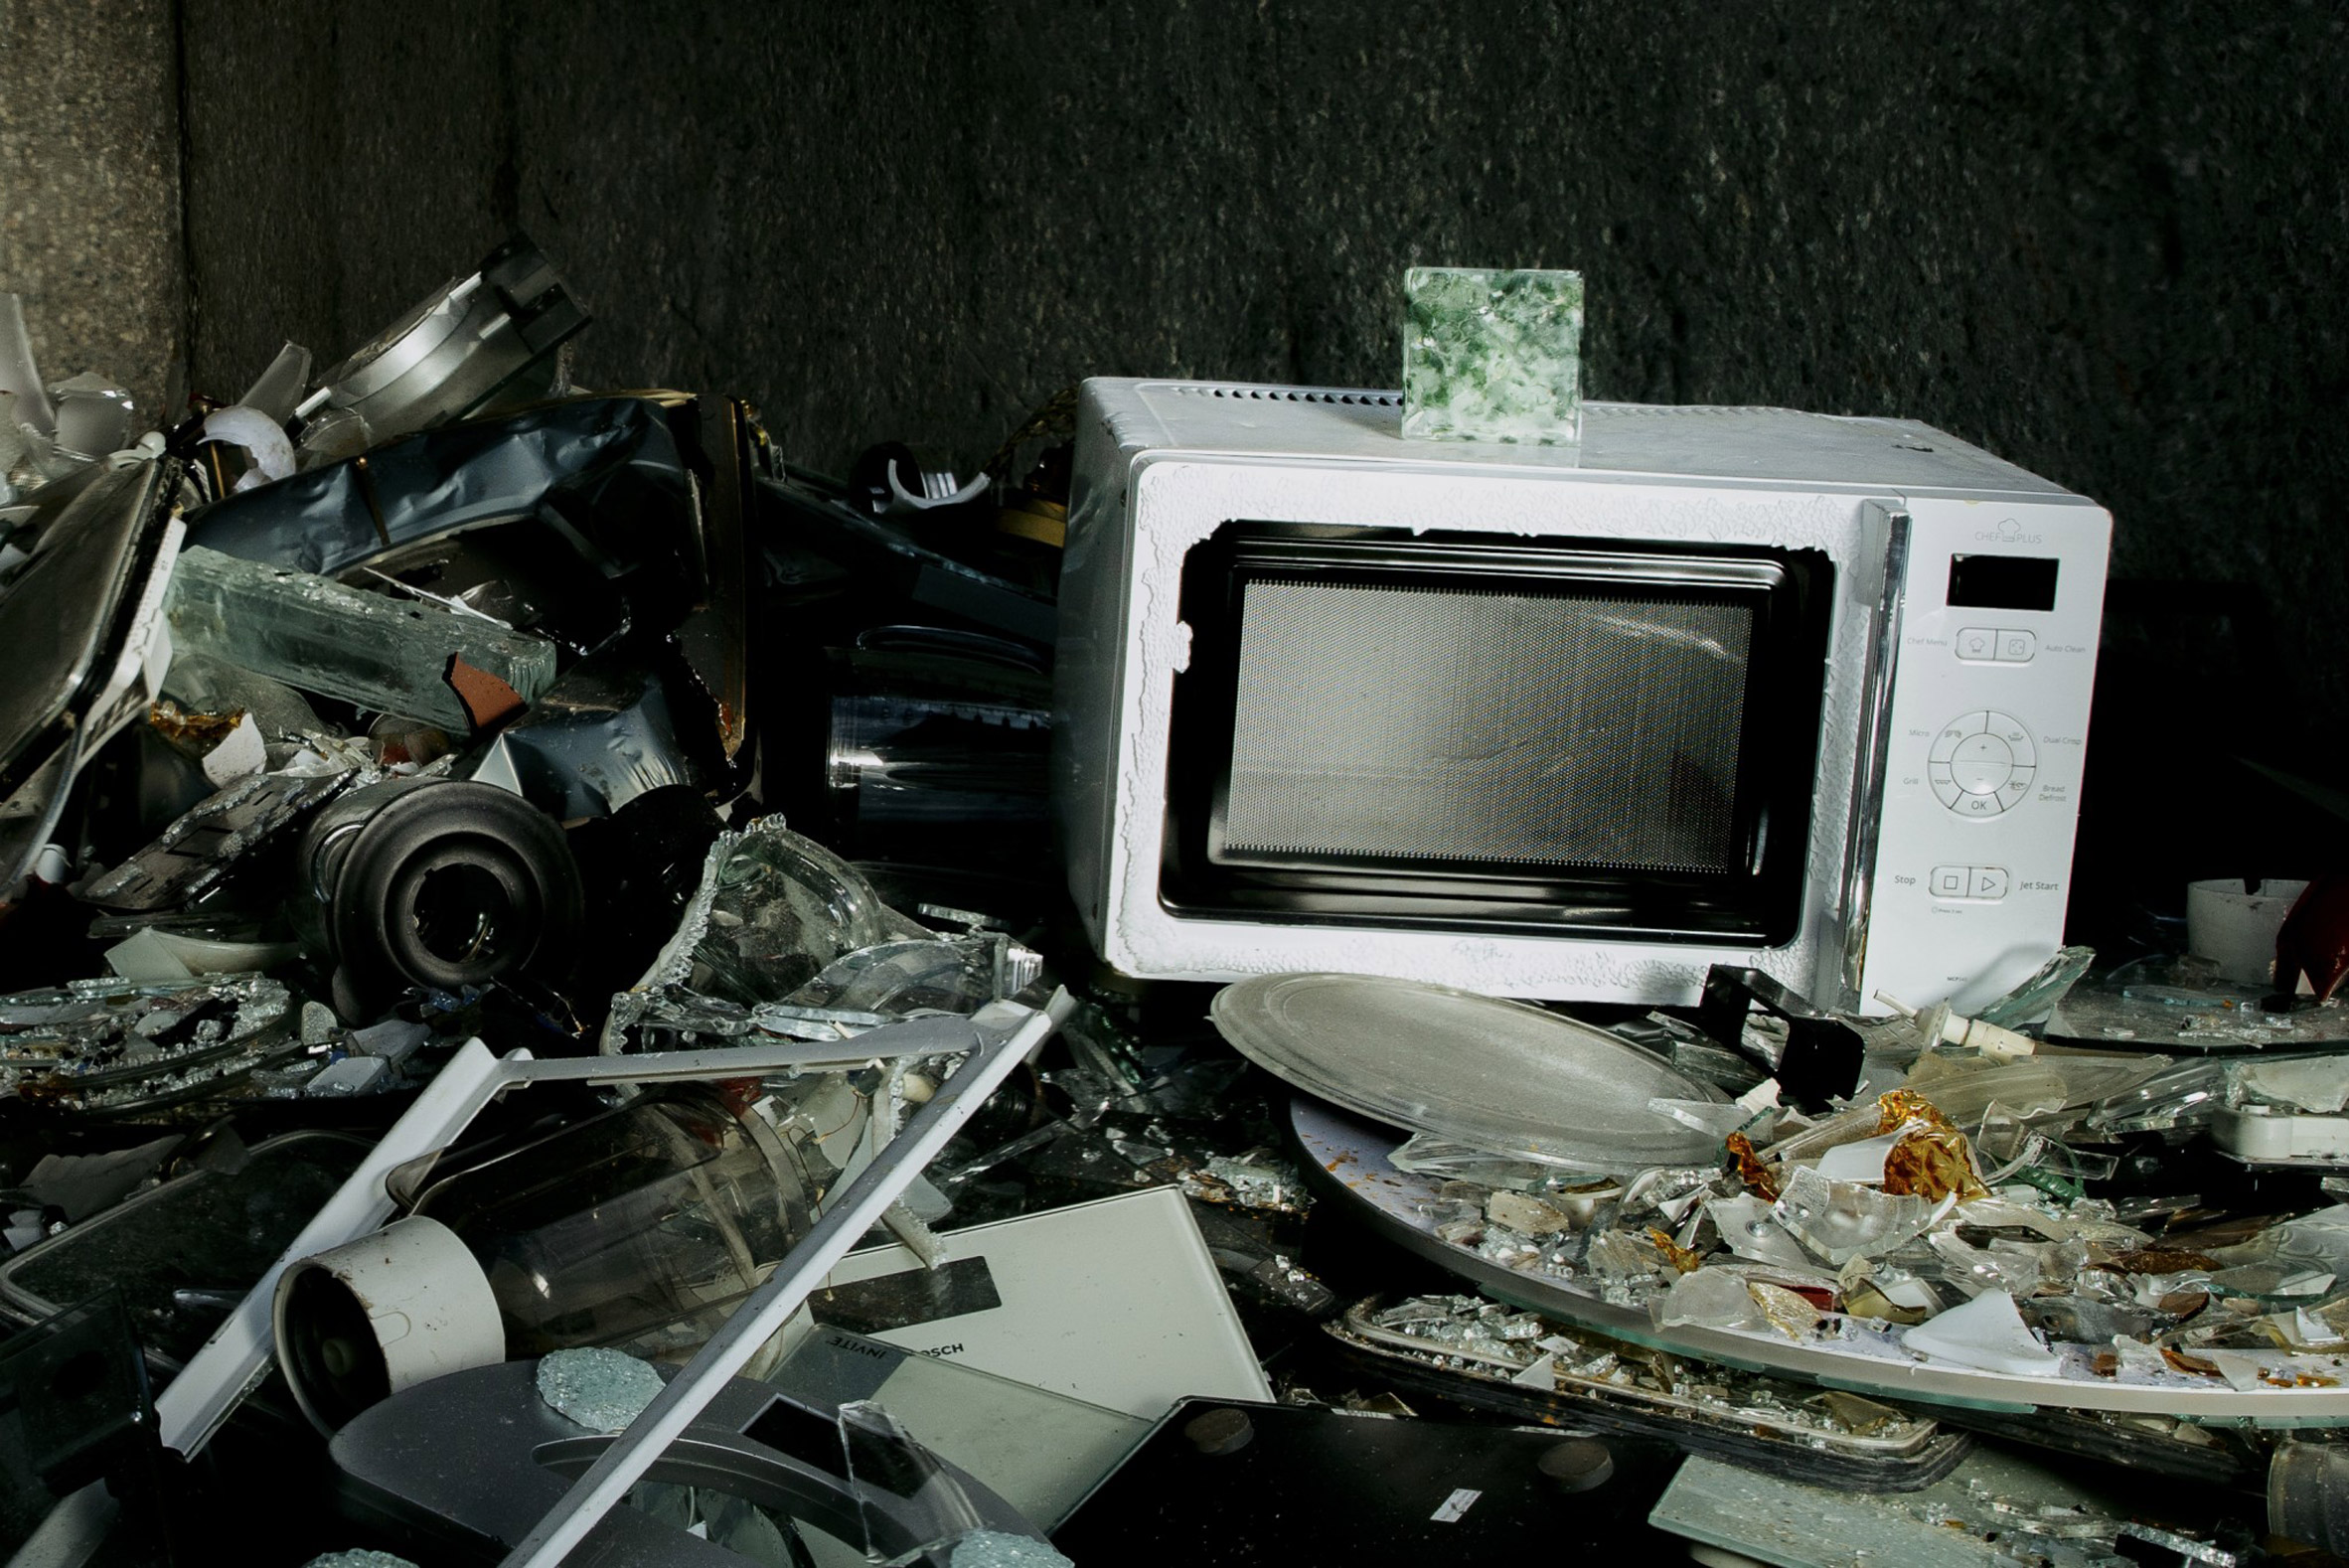 A Common Sands tile sitting on top of a microwave in a pile of broken glass and e-waste